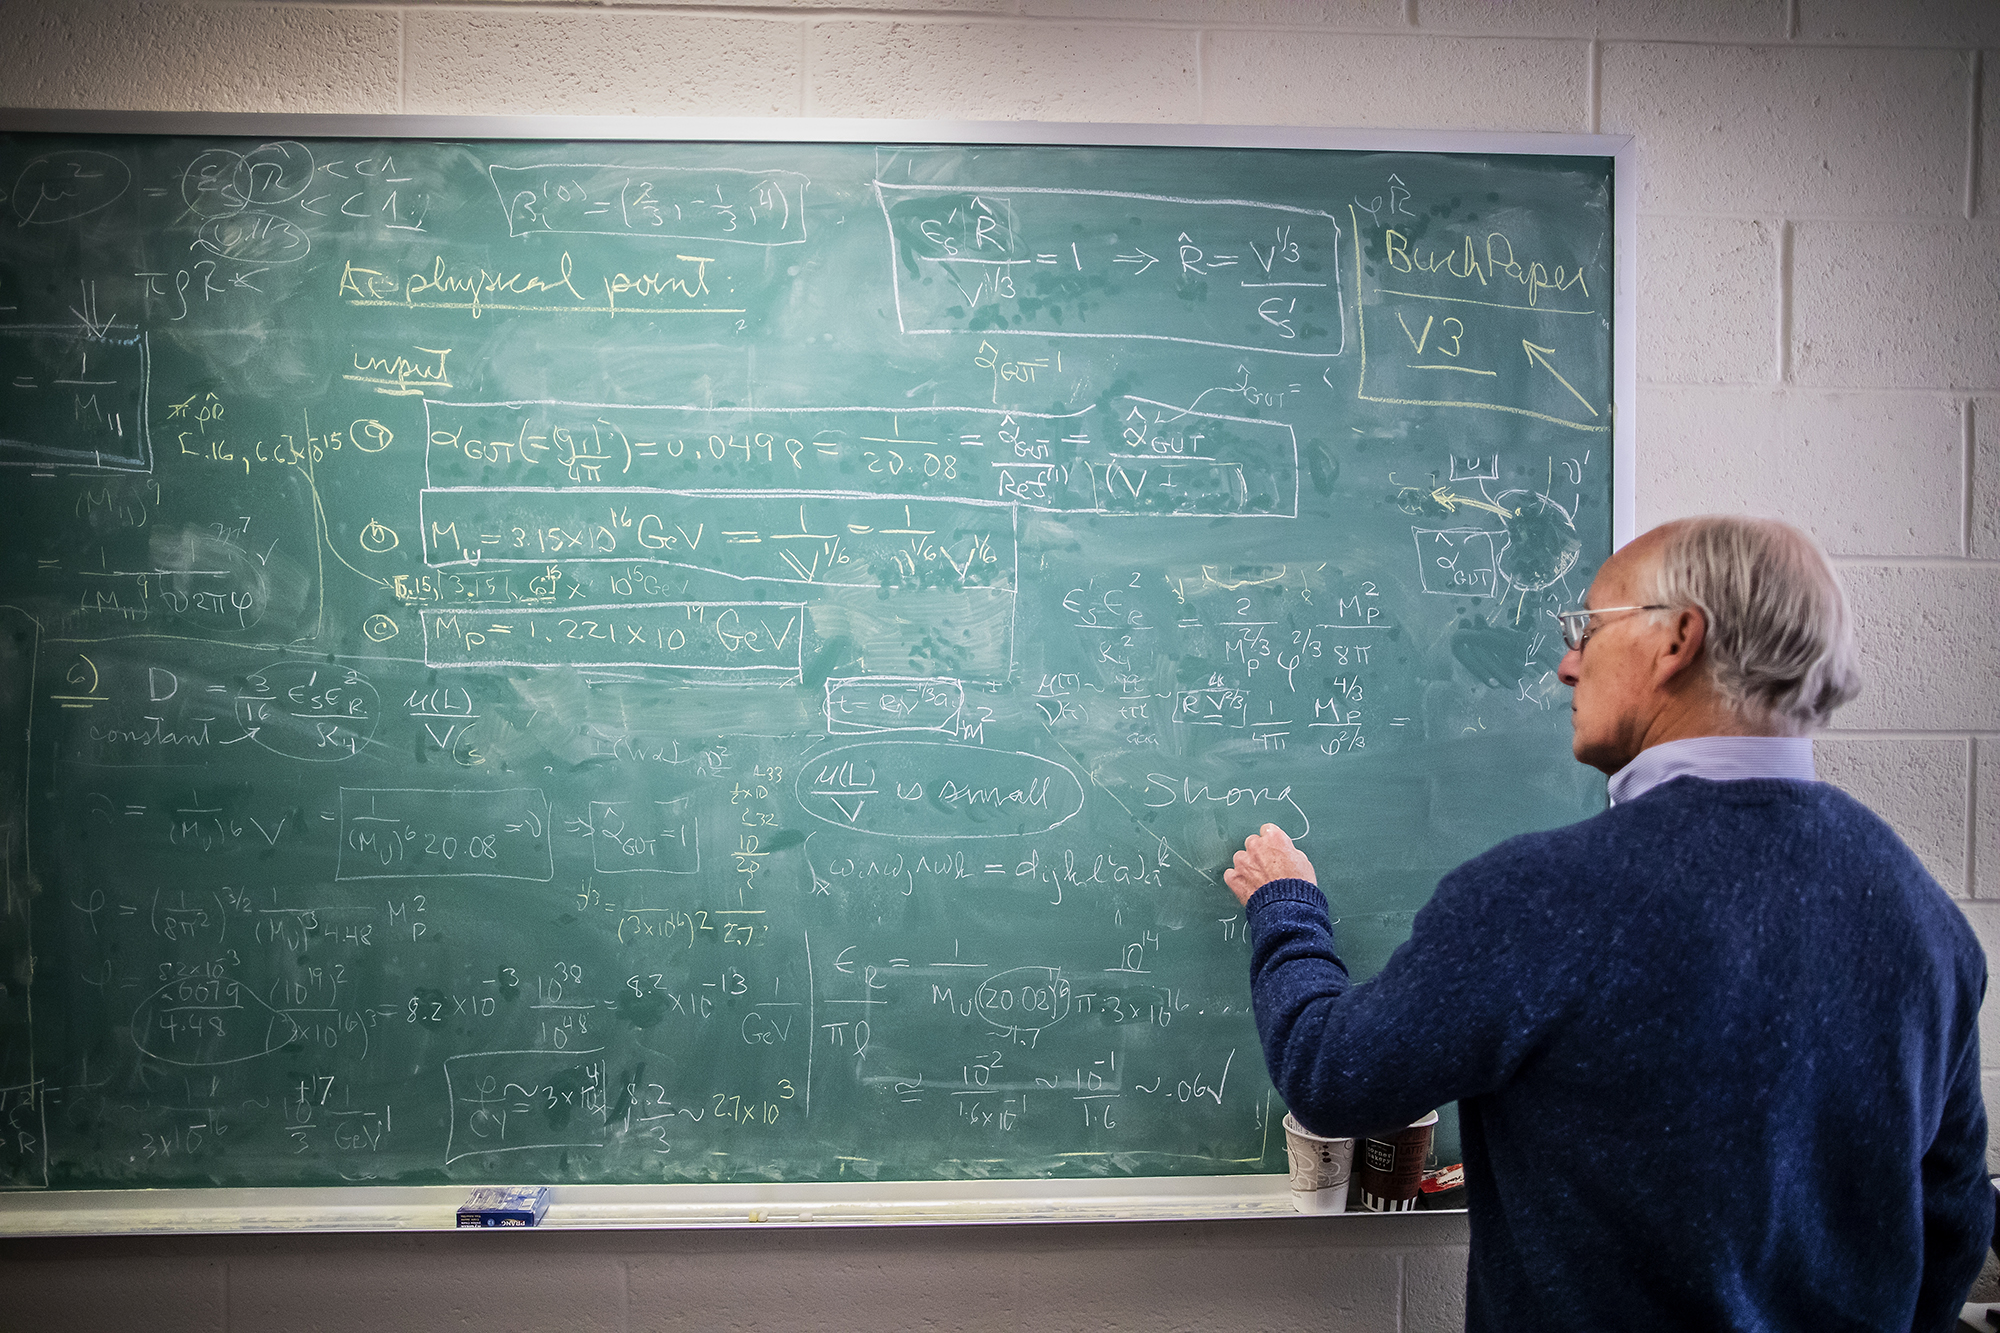 a person standing in front of a chalkboard covered in equations